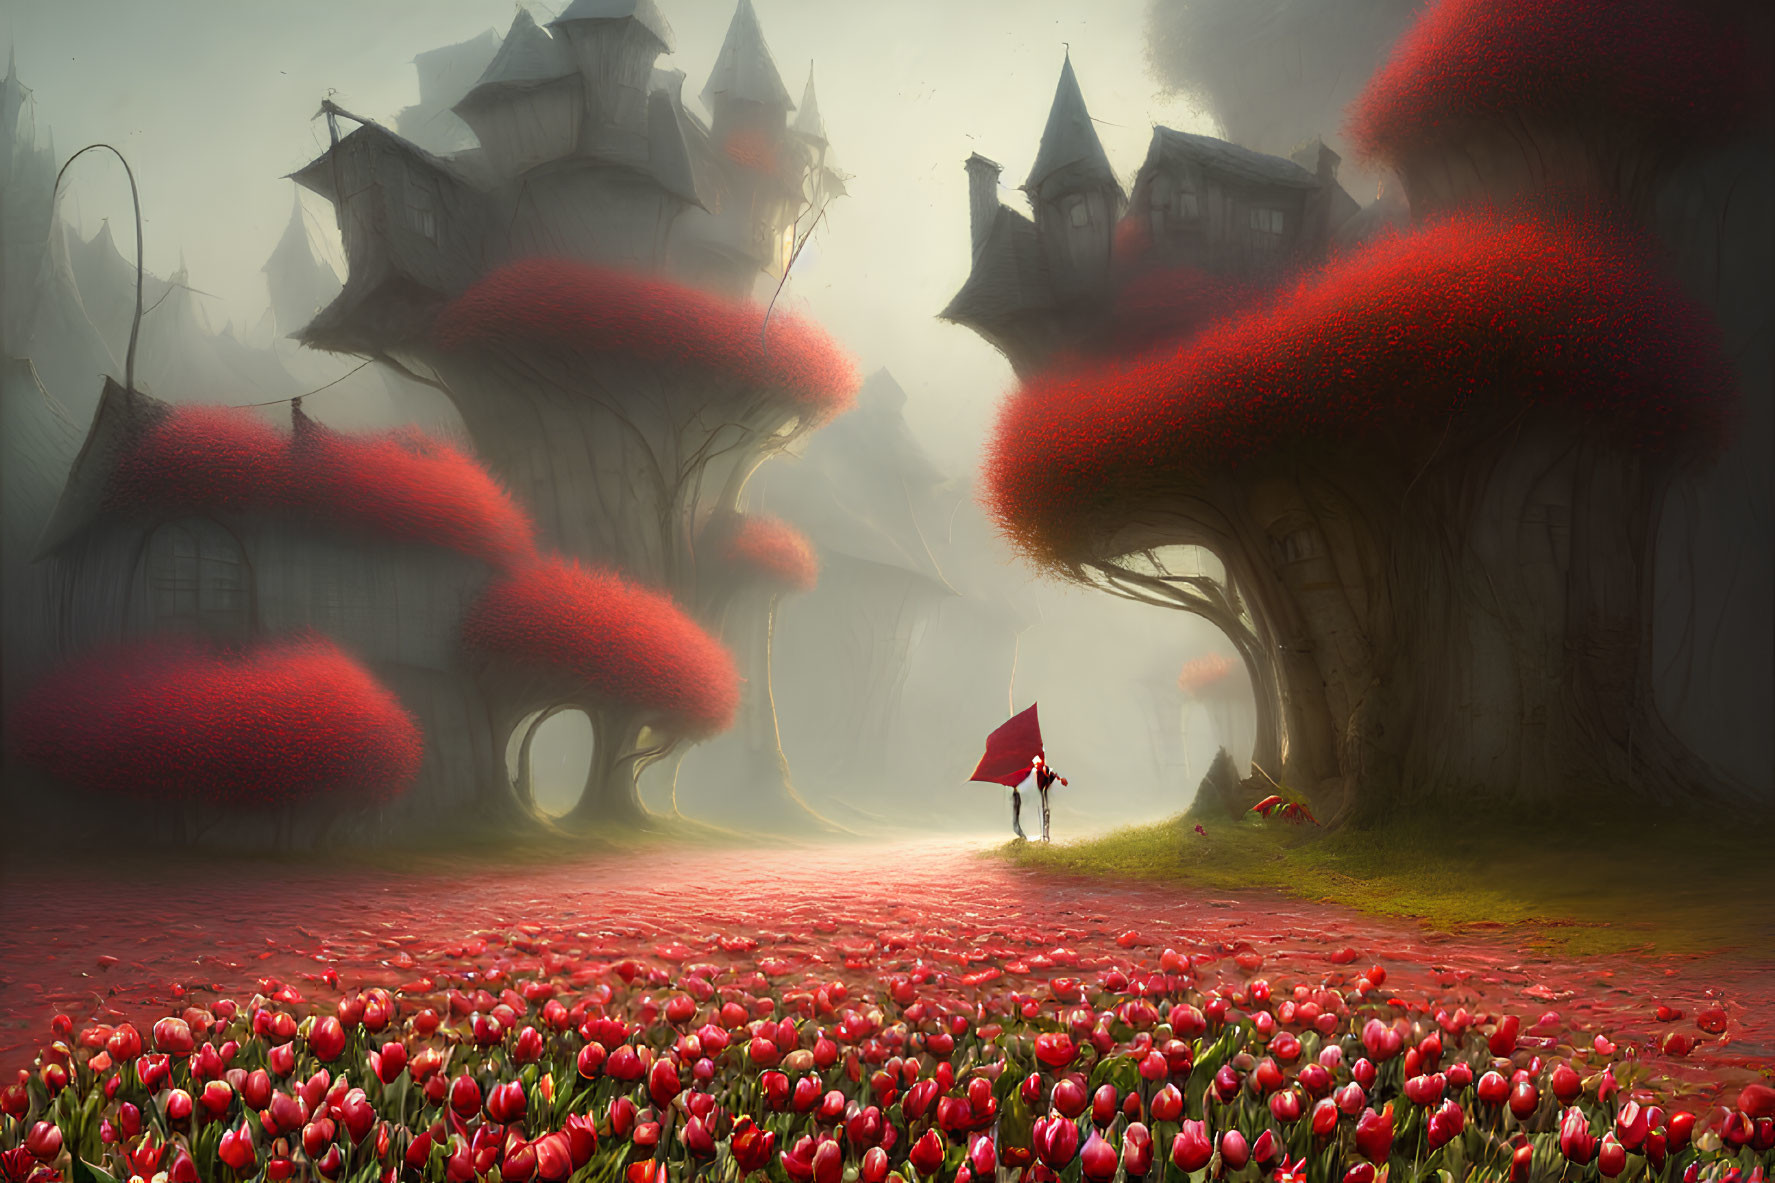 Whimsical scene with mushroom-shaped trees, red foliage, tulips, houses, and figure with